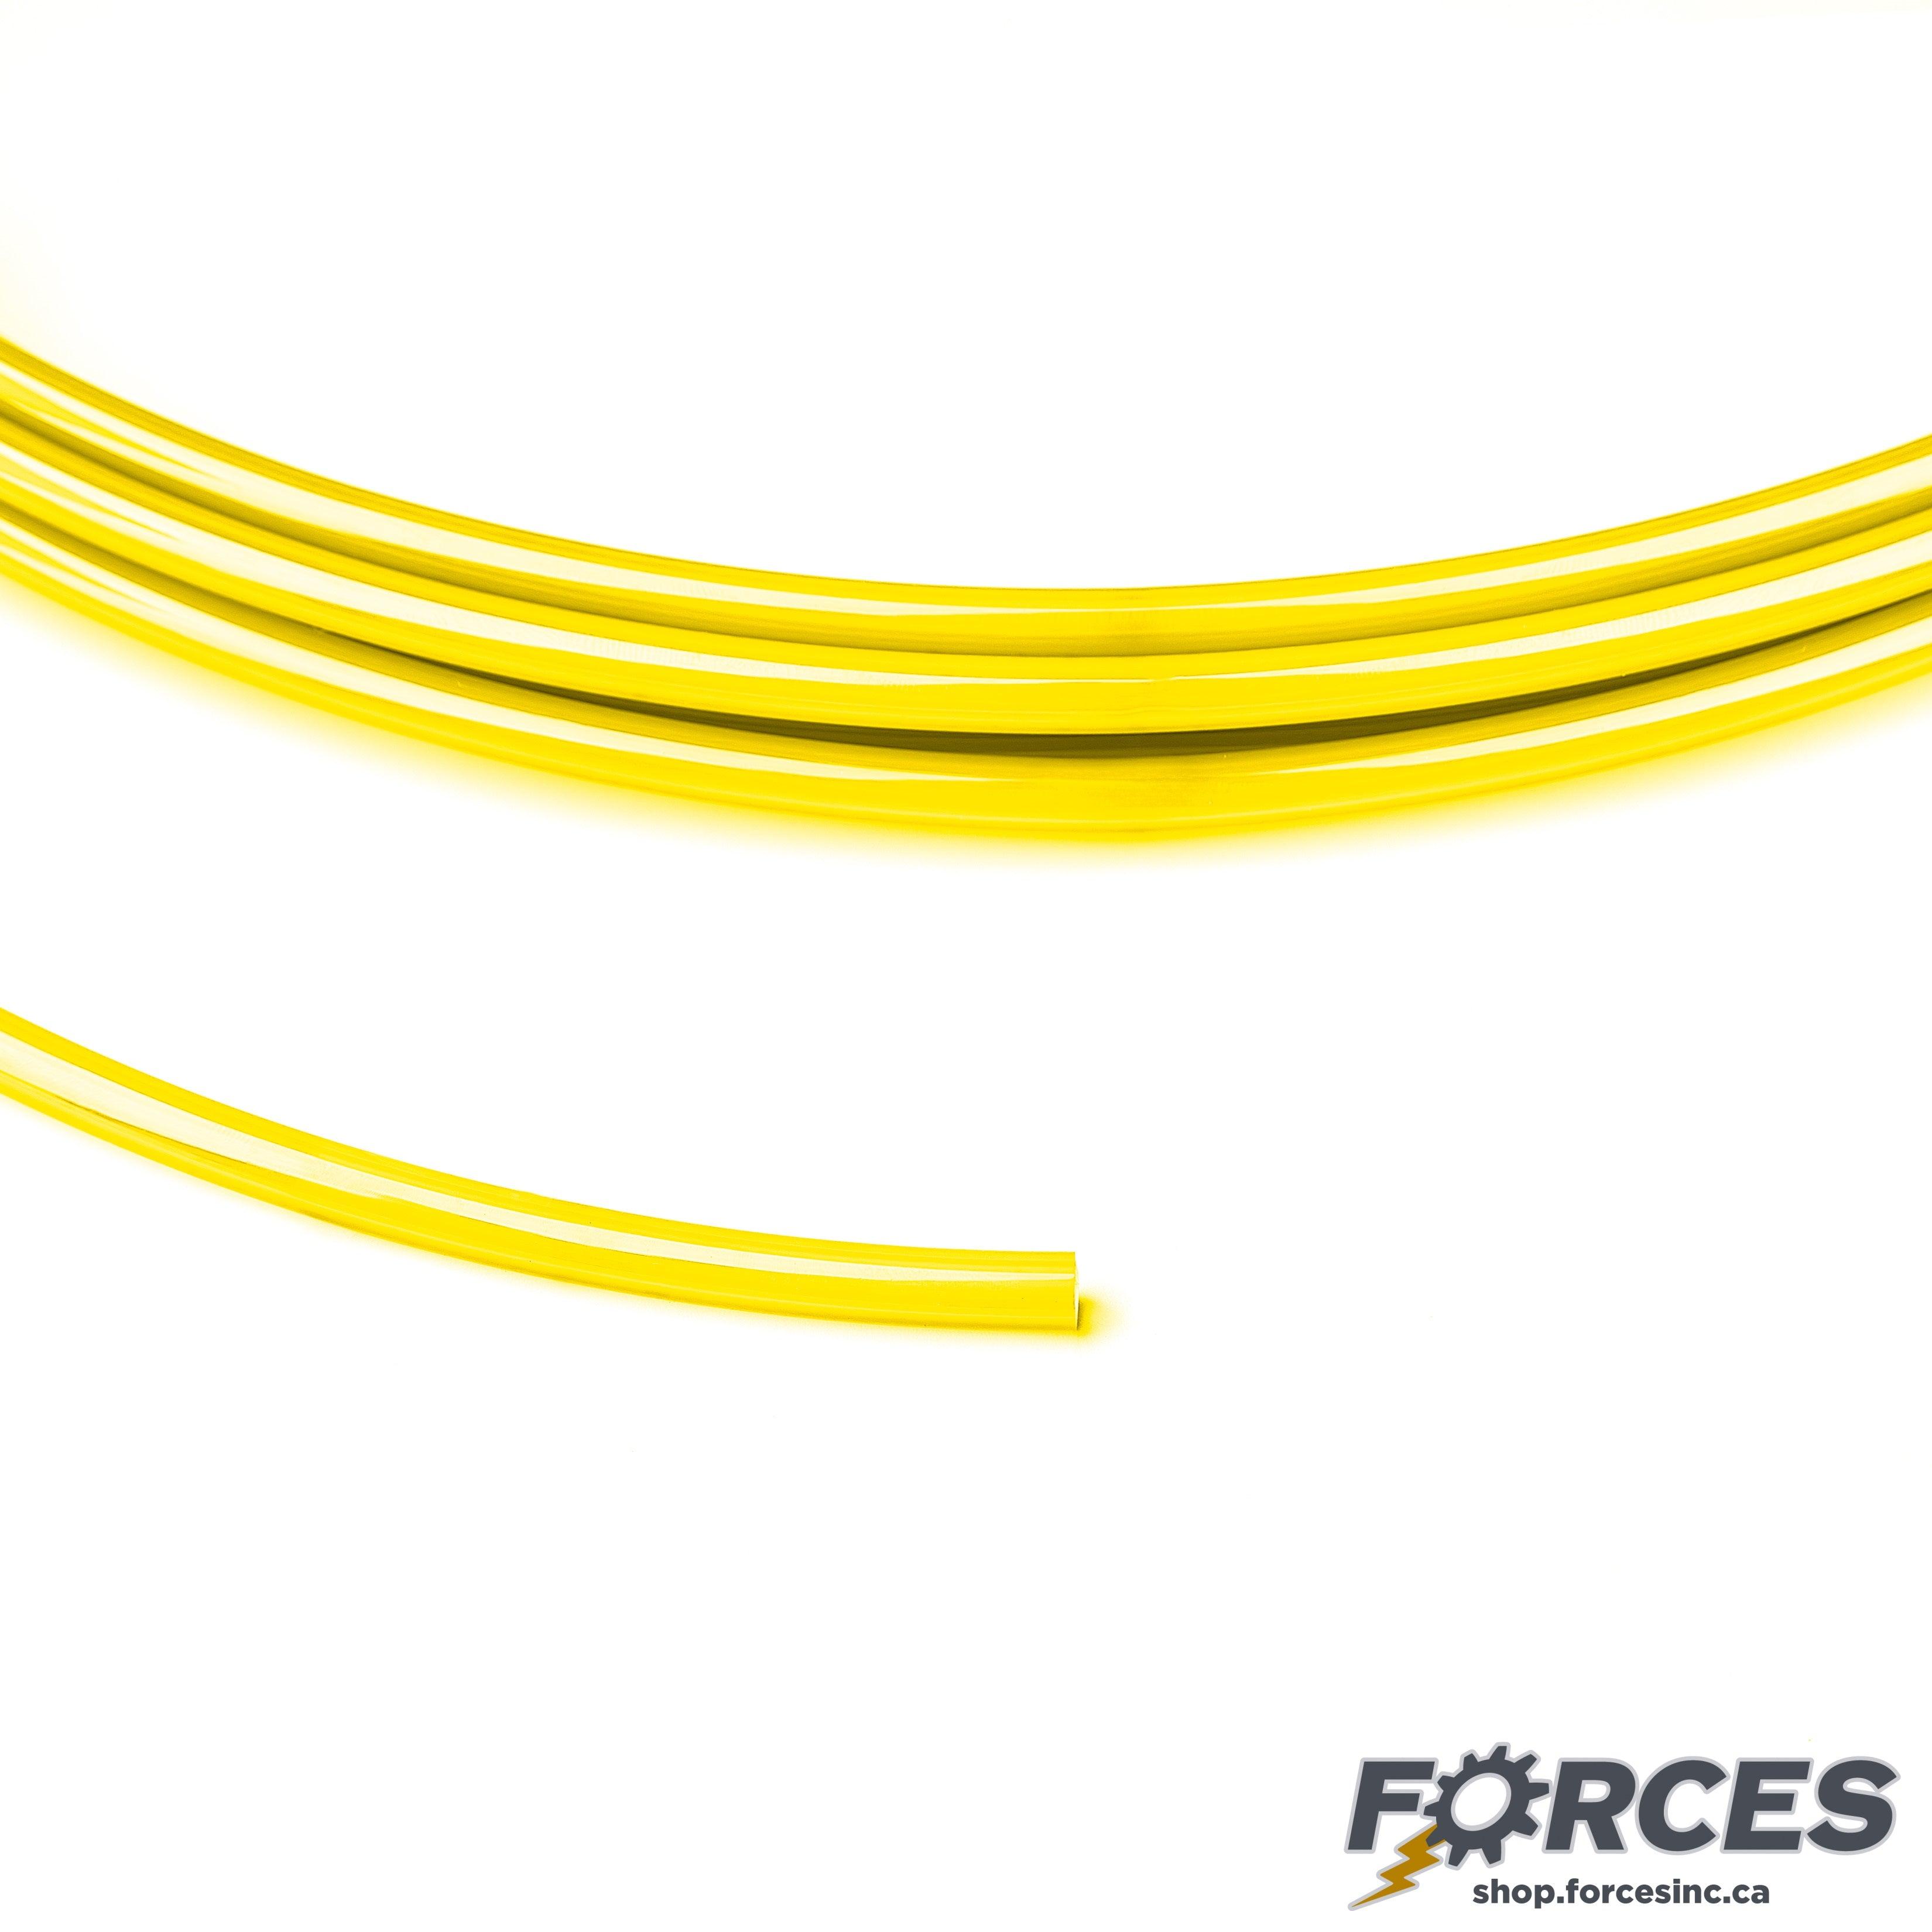 Pneumatic Air Tubing 1/4" x 4.2mm Yellow Polyurethane - 330ft - Forces Inc